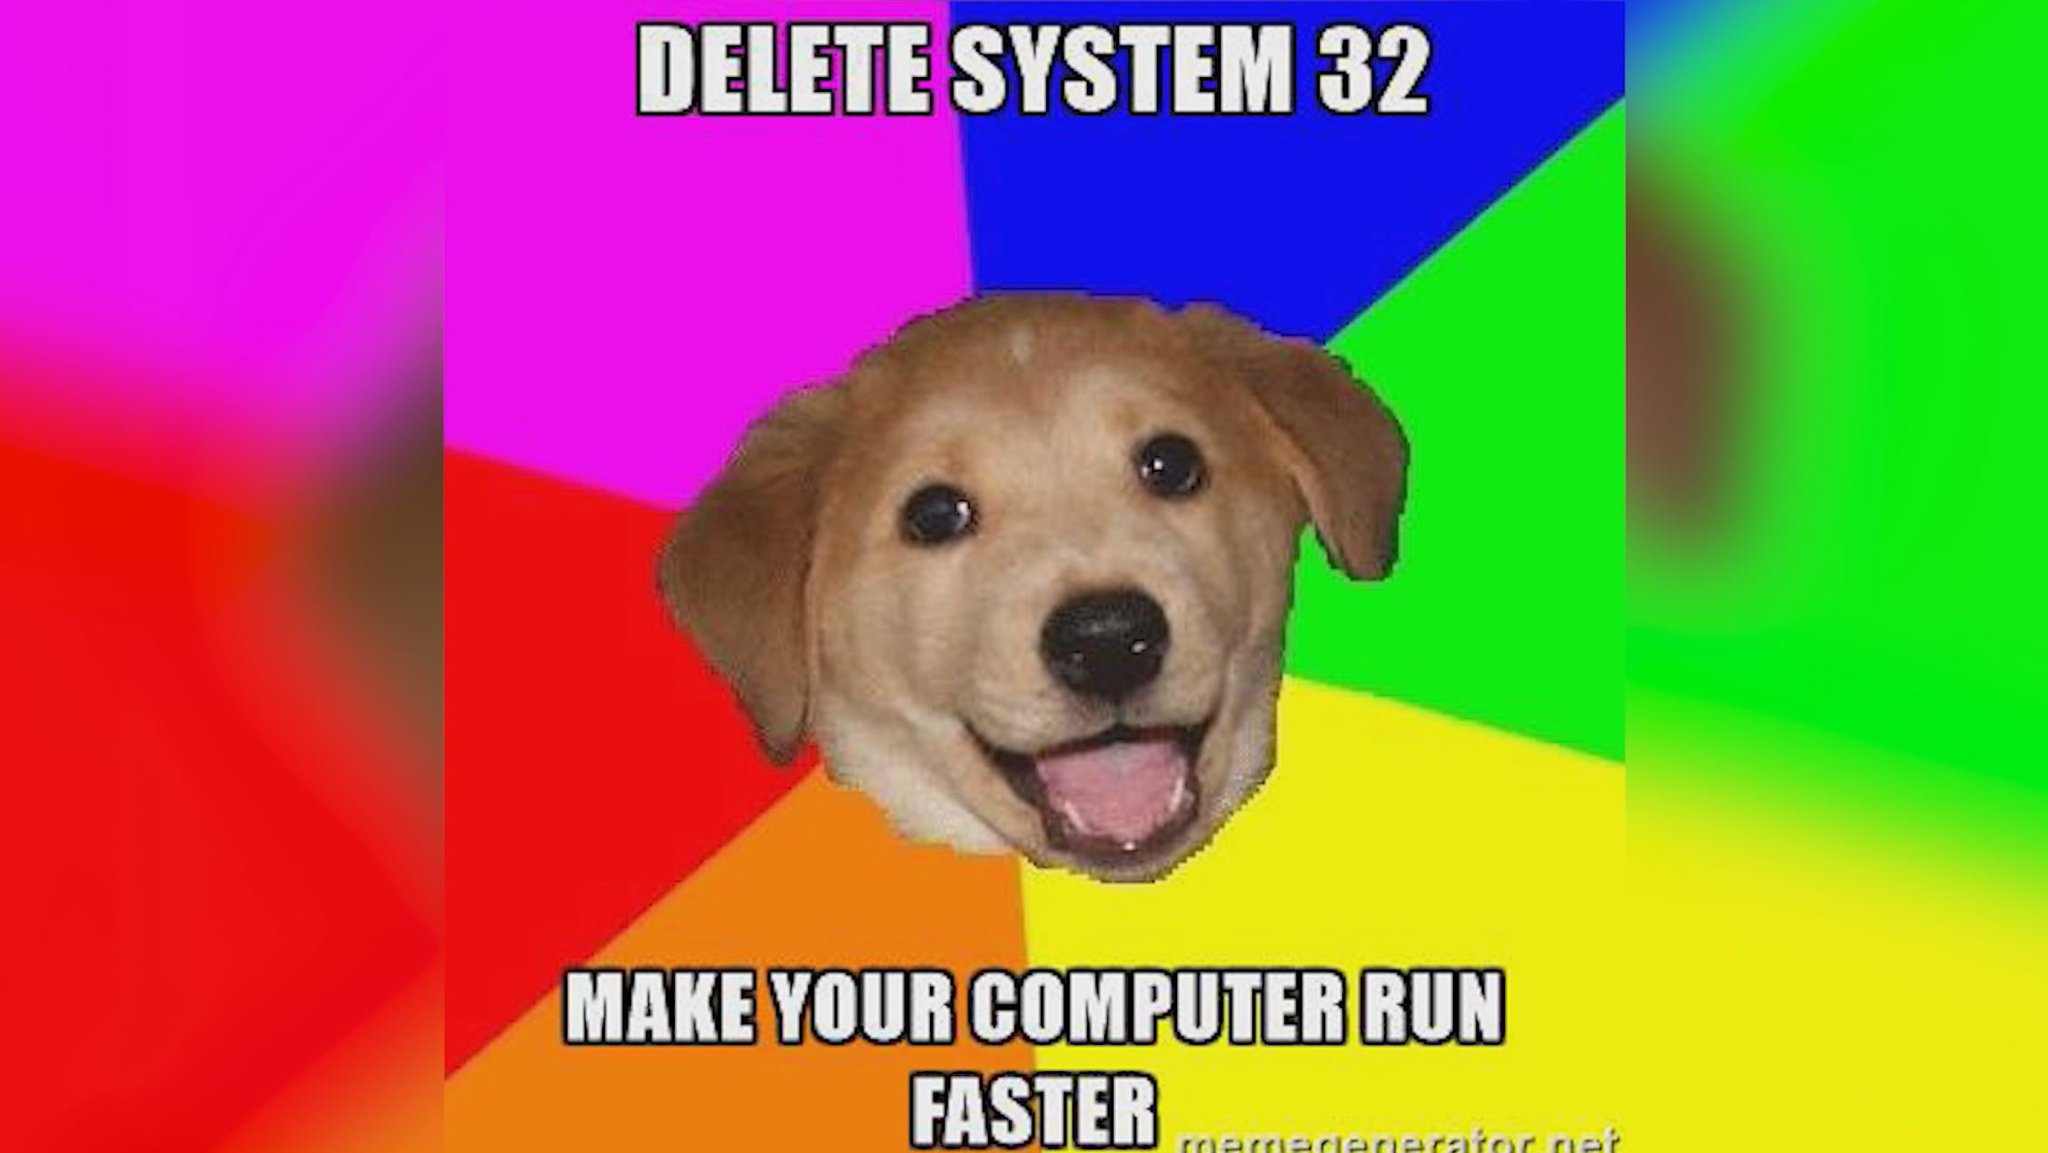 How to make your Computer run faster.. - Imgflip